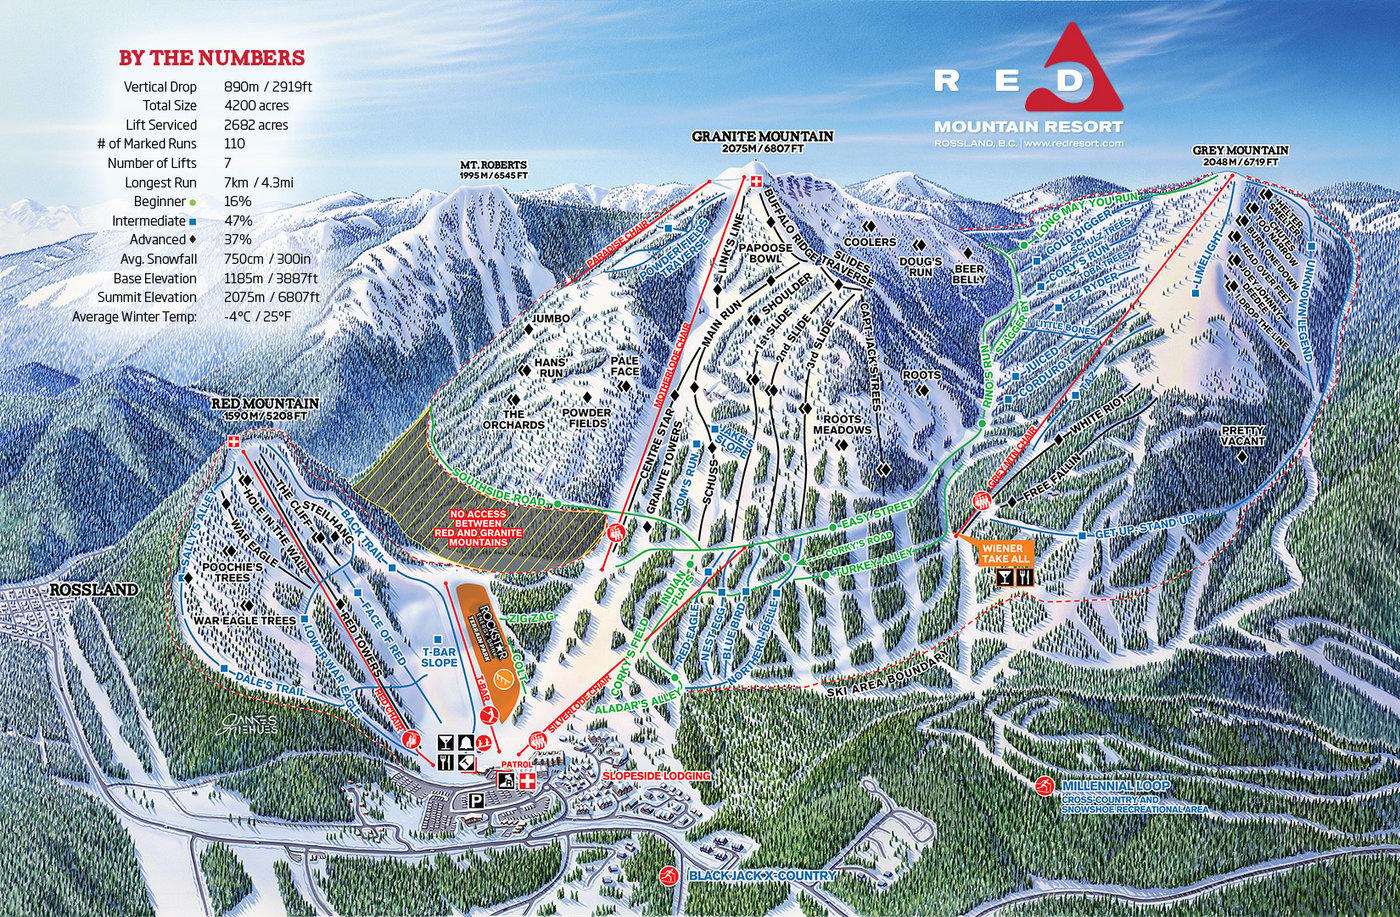 RED Mountain Resort Trail Map